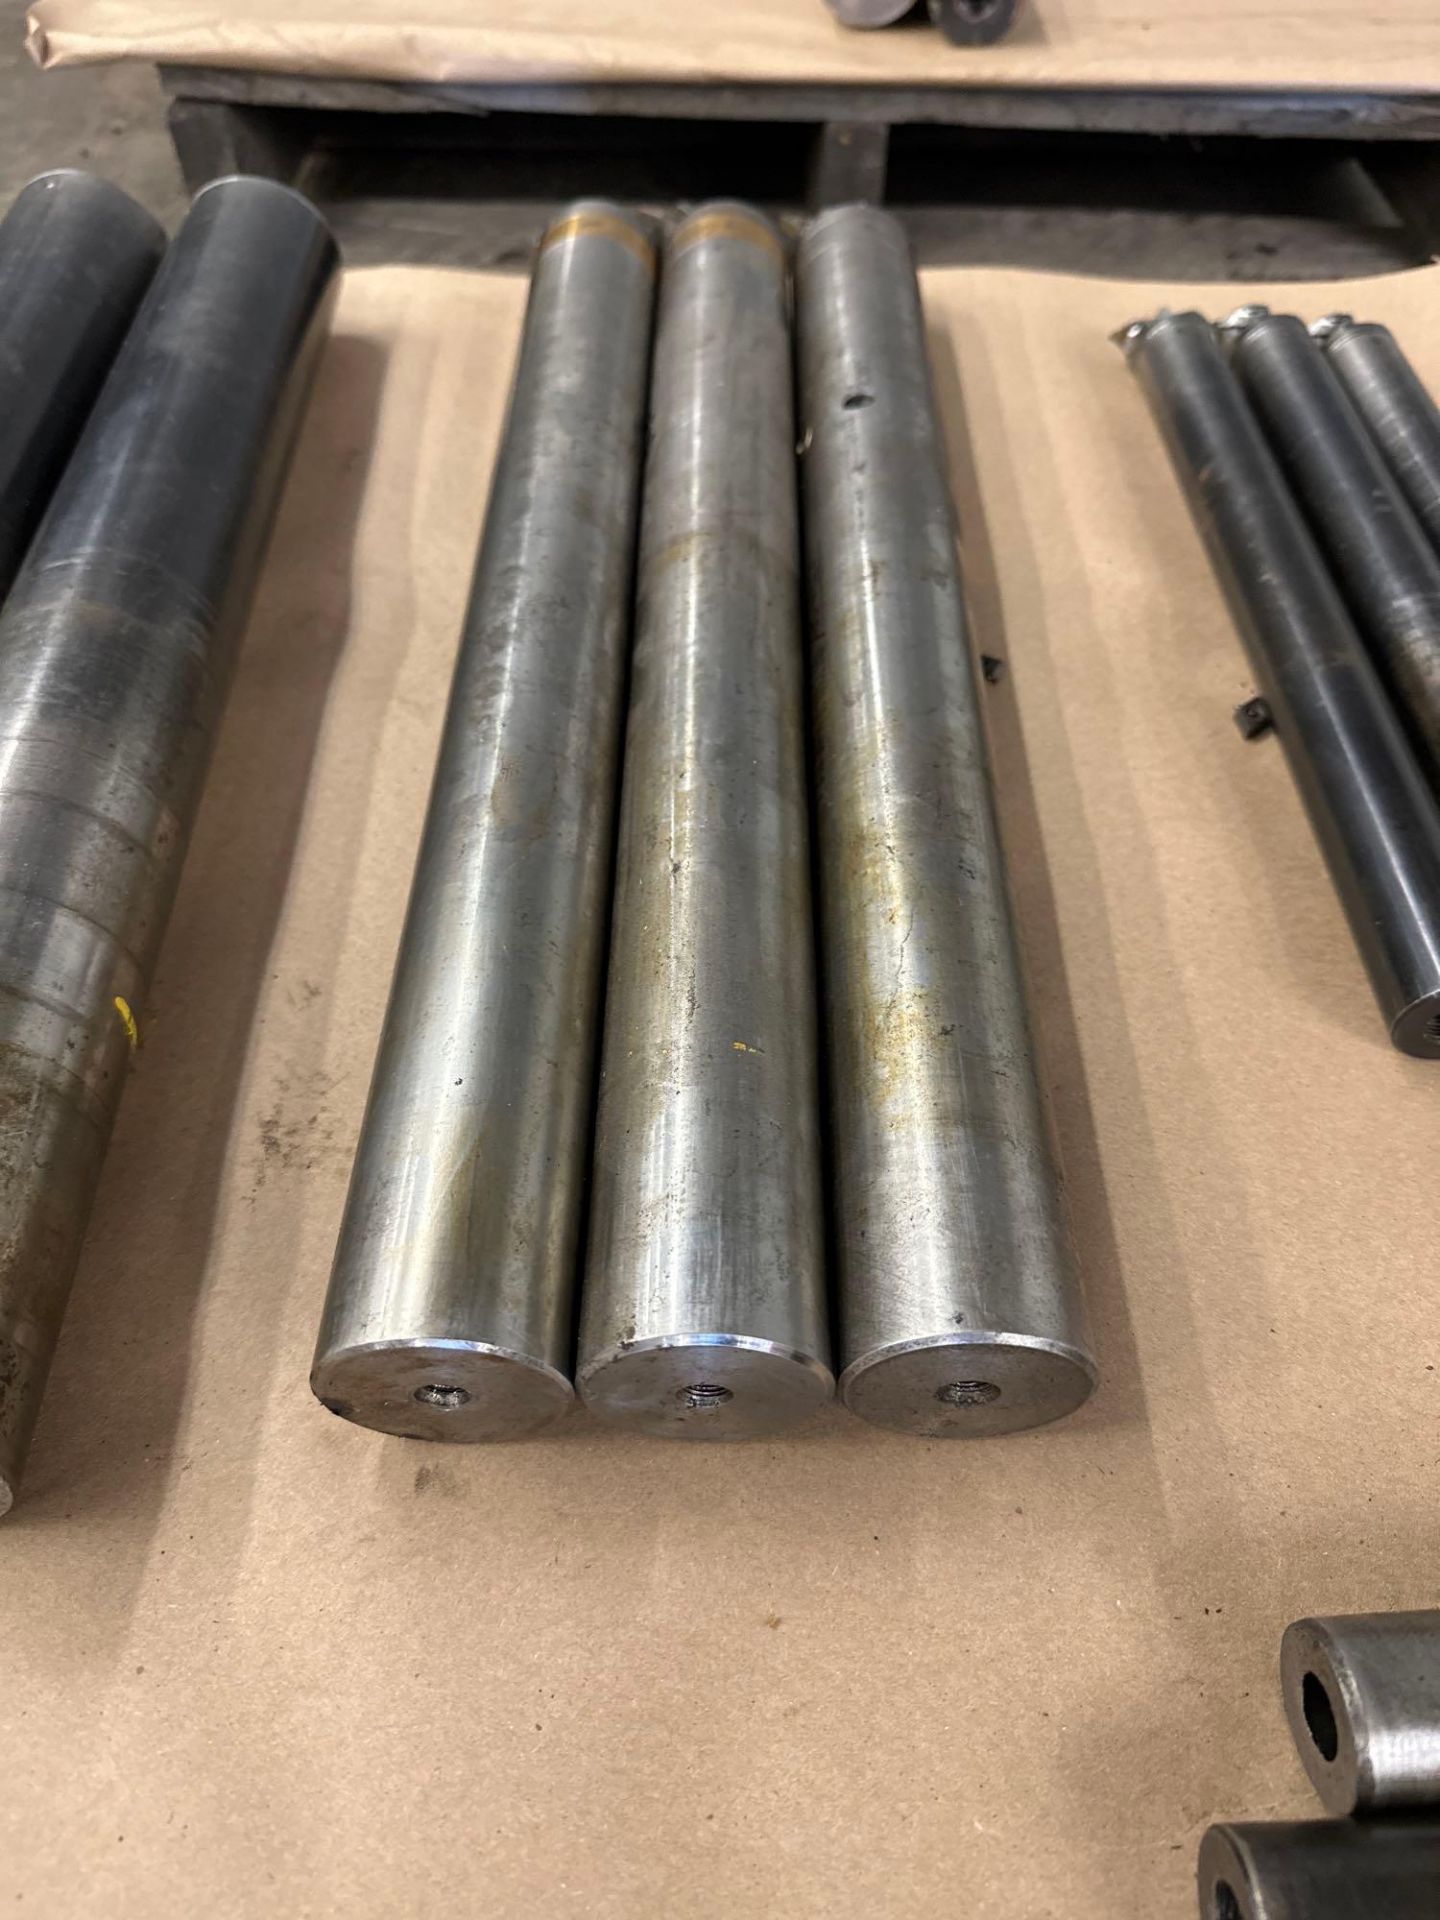 Lot of 3 Ultra Dex Boring Bars with Heads on: (2) CFT B2000 20, 1 7/8” X 19 1/2” (1) CFT B2000 18, 1 - Image 3 of 5